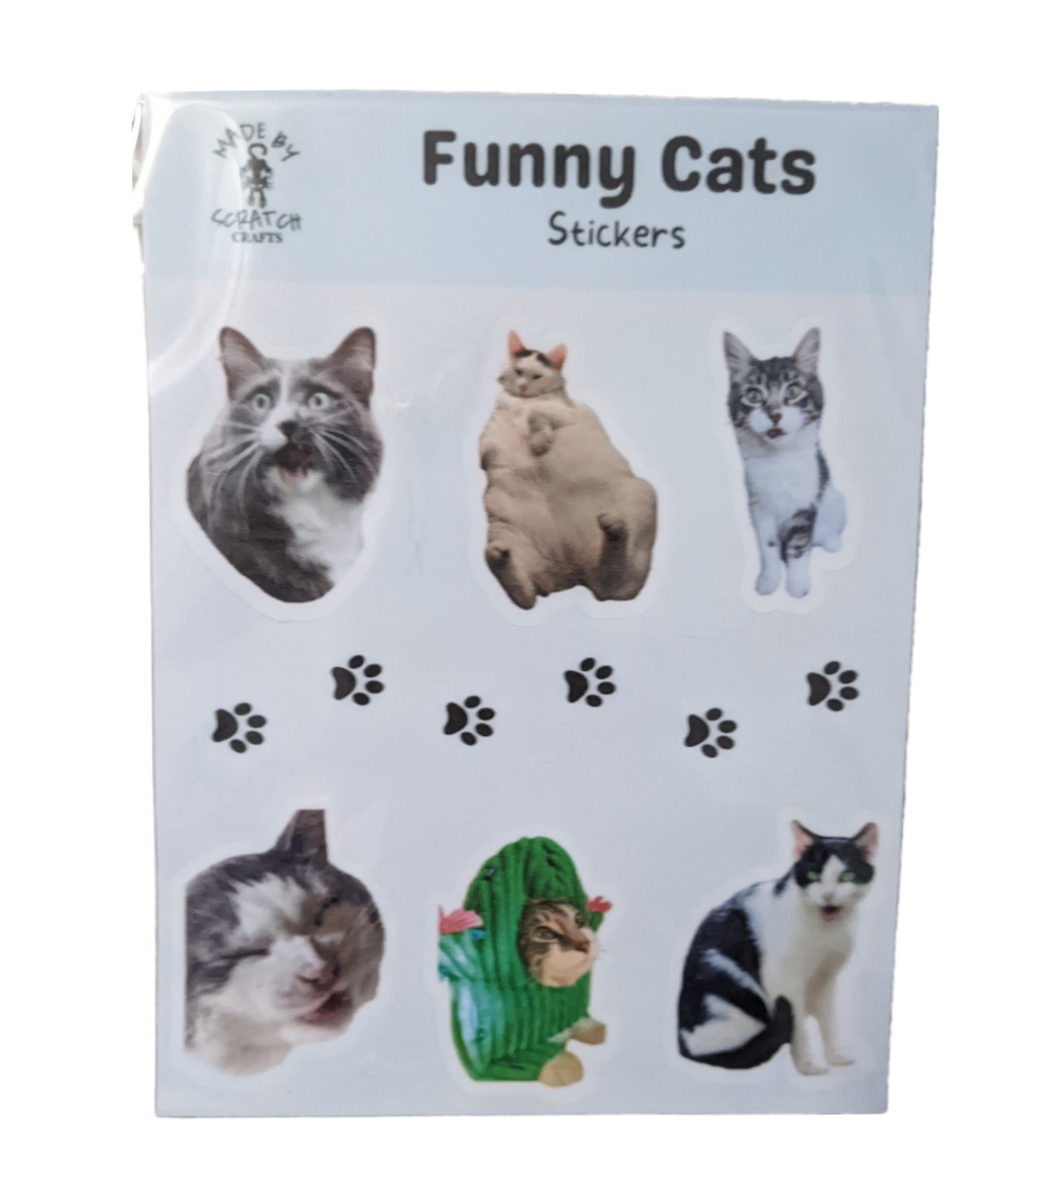 Cat Stationary Stickers, Funny Stickers Cats, Cat Memes Stickers